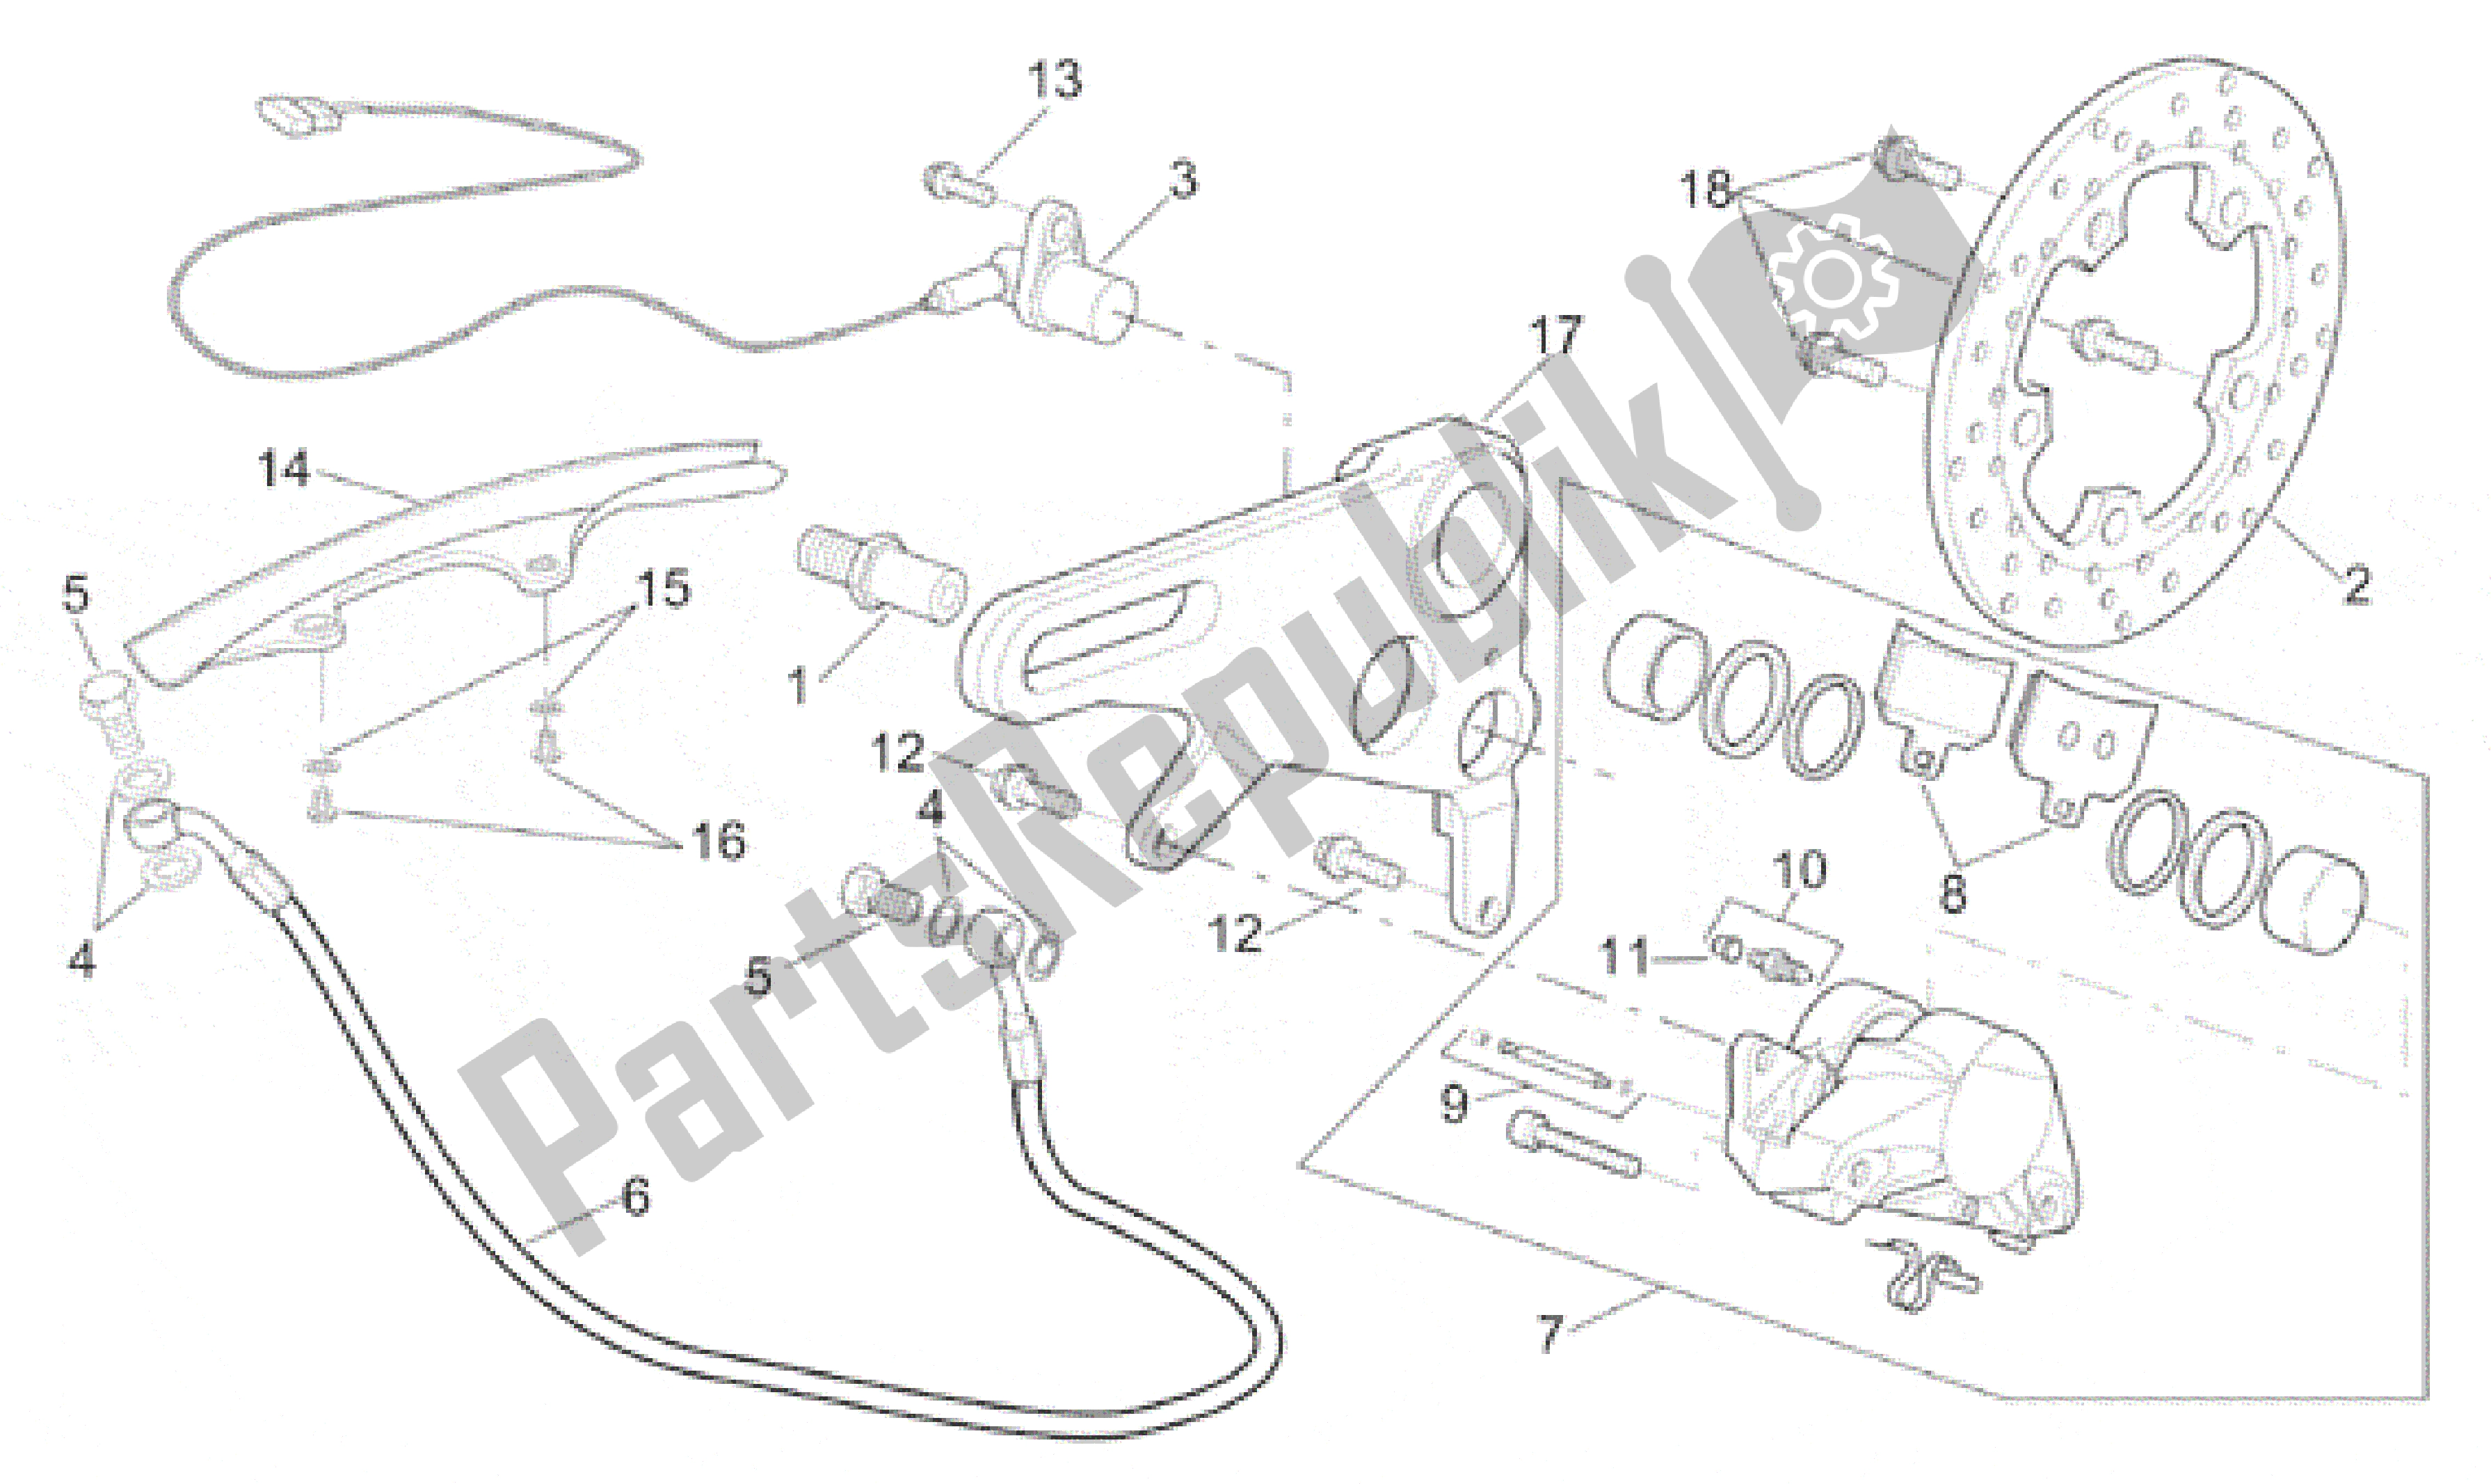 All parts for the Rear Brake Caliper of the Aprilia RSV Mille SP 391 X 1000 1999 - 2000